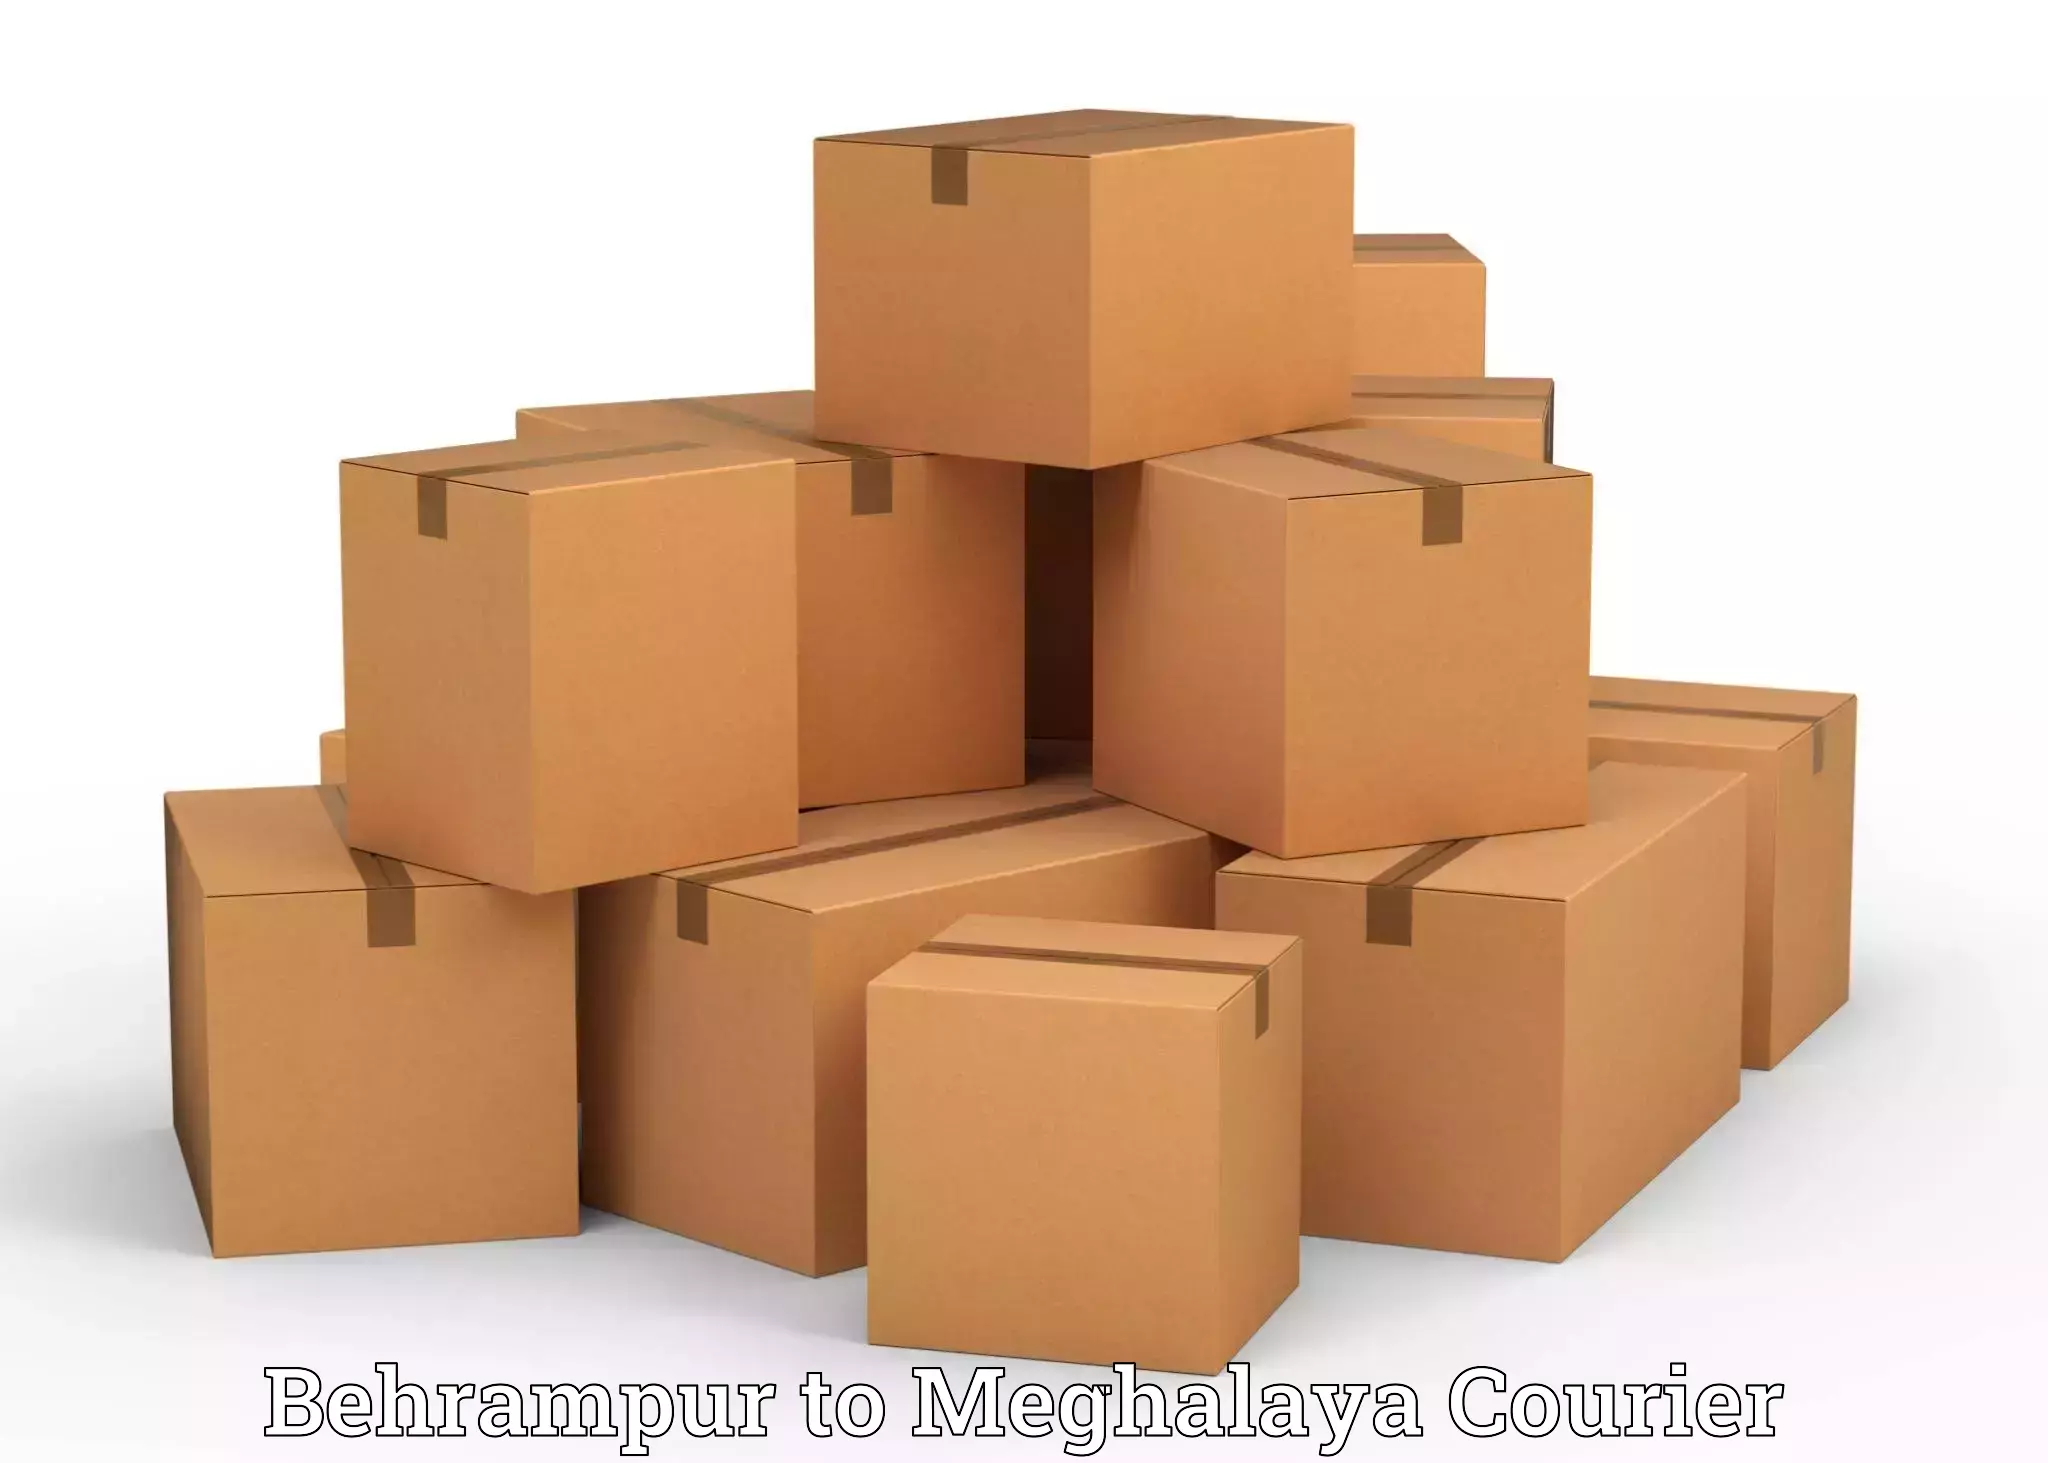 Moving and packing experts Behrampur to Cherrapunji